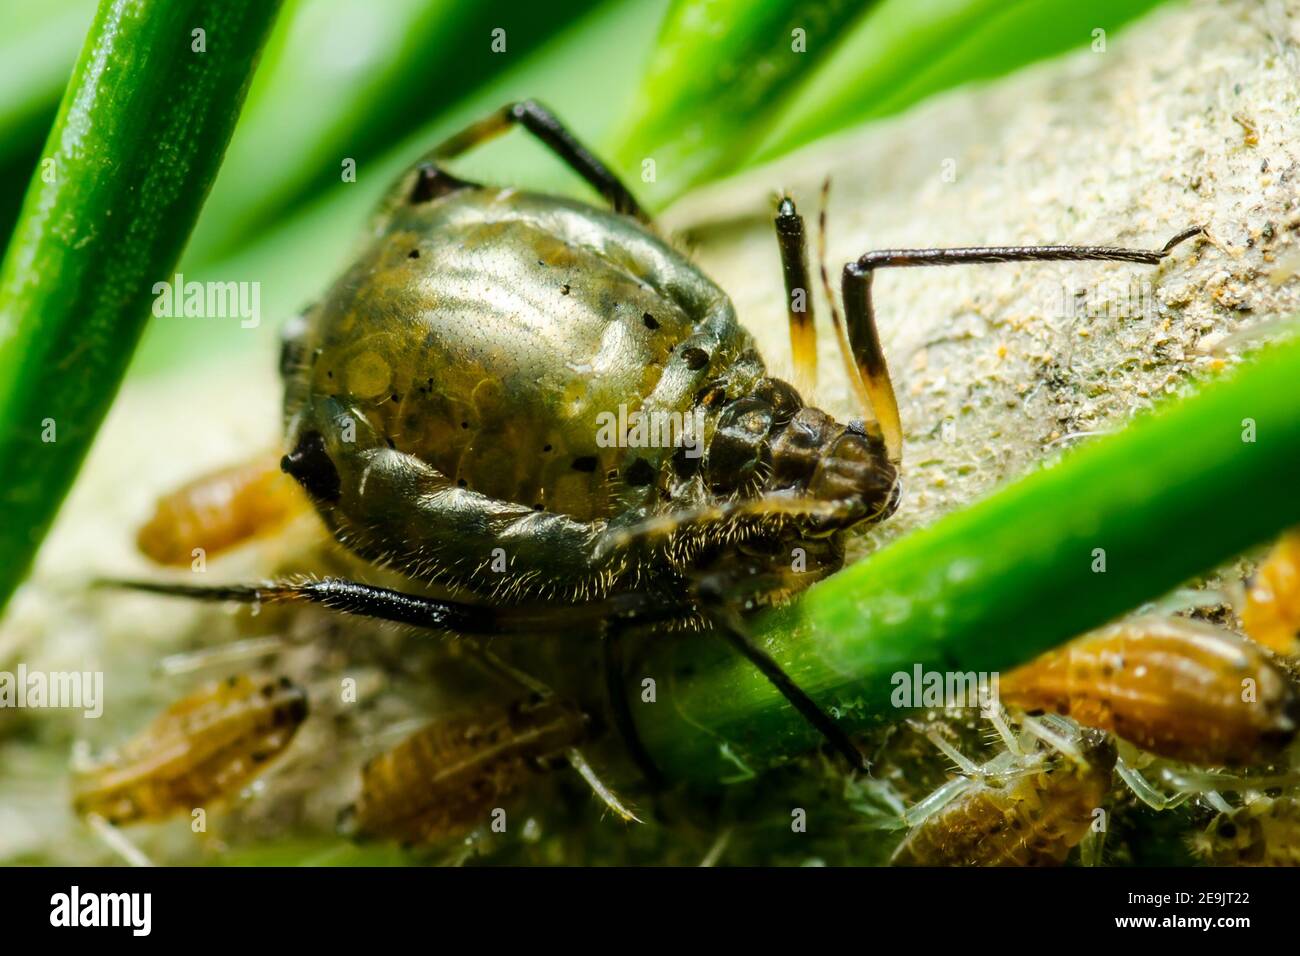 Bow-Legged Abies Fir Aphid Parasite Pest Insect on Green Fir Tree Macro Stock Photo